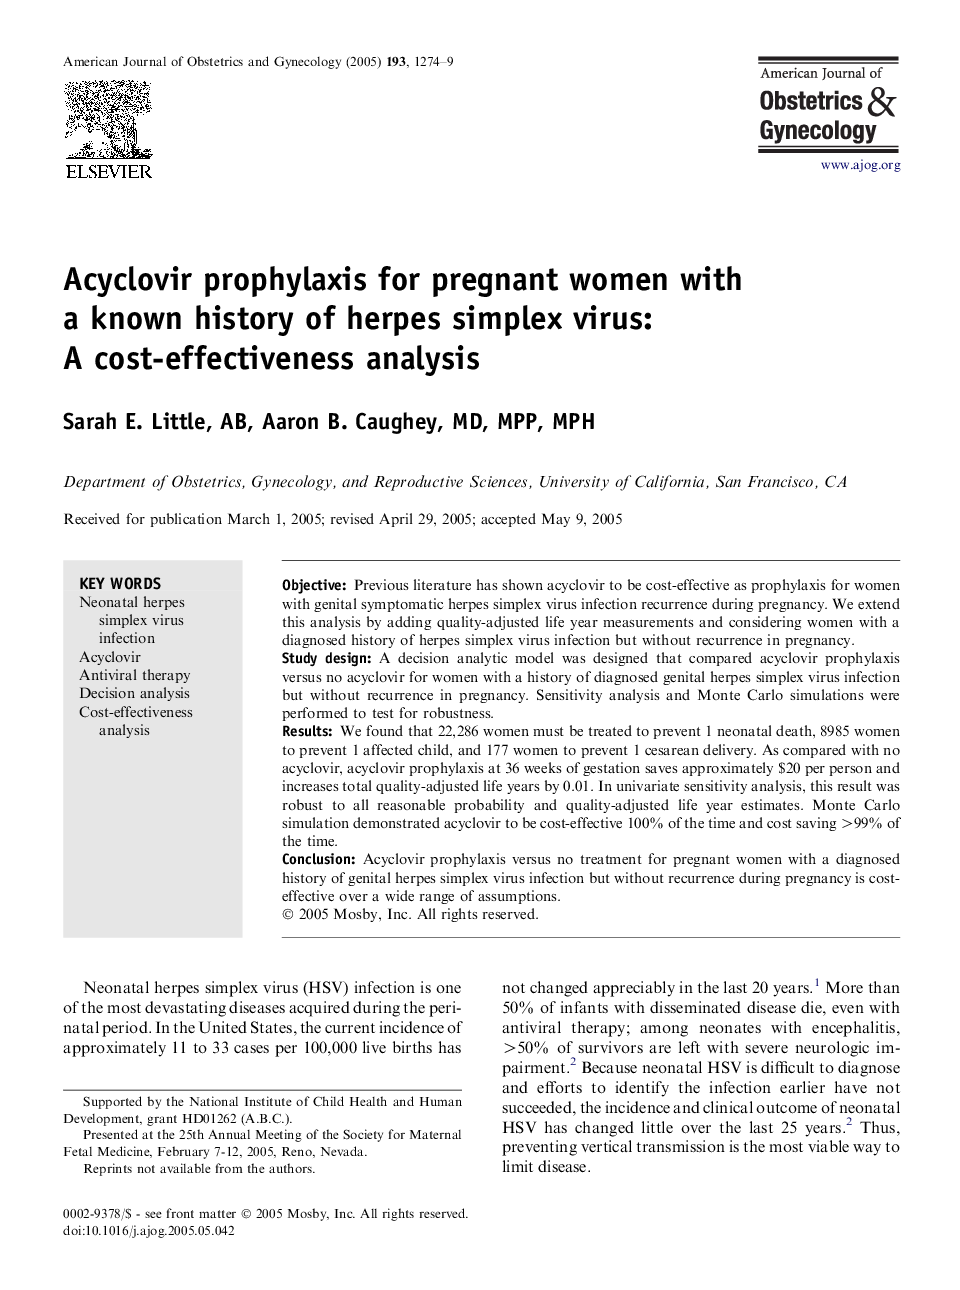 Acyclovir prophylaxis for pregnant women with a known history of herpes simplex virus: A cost-effectiveness analysis